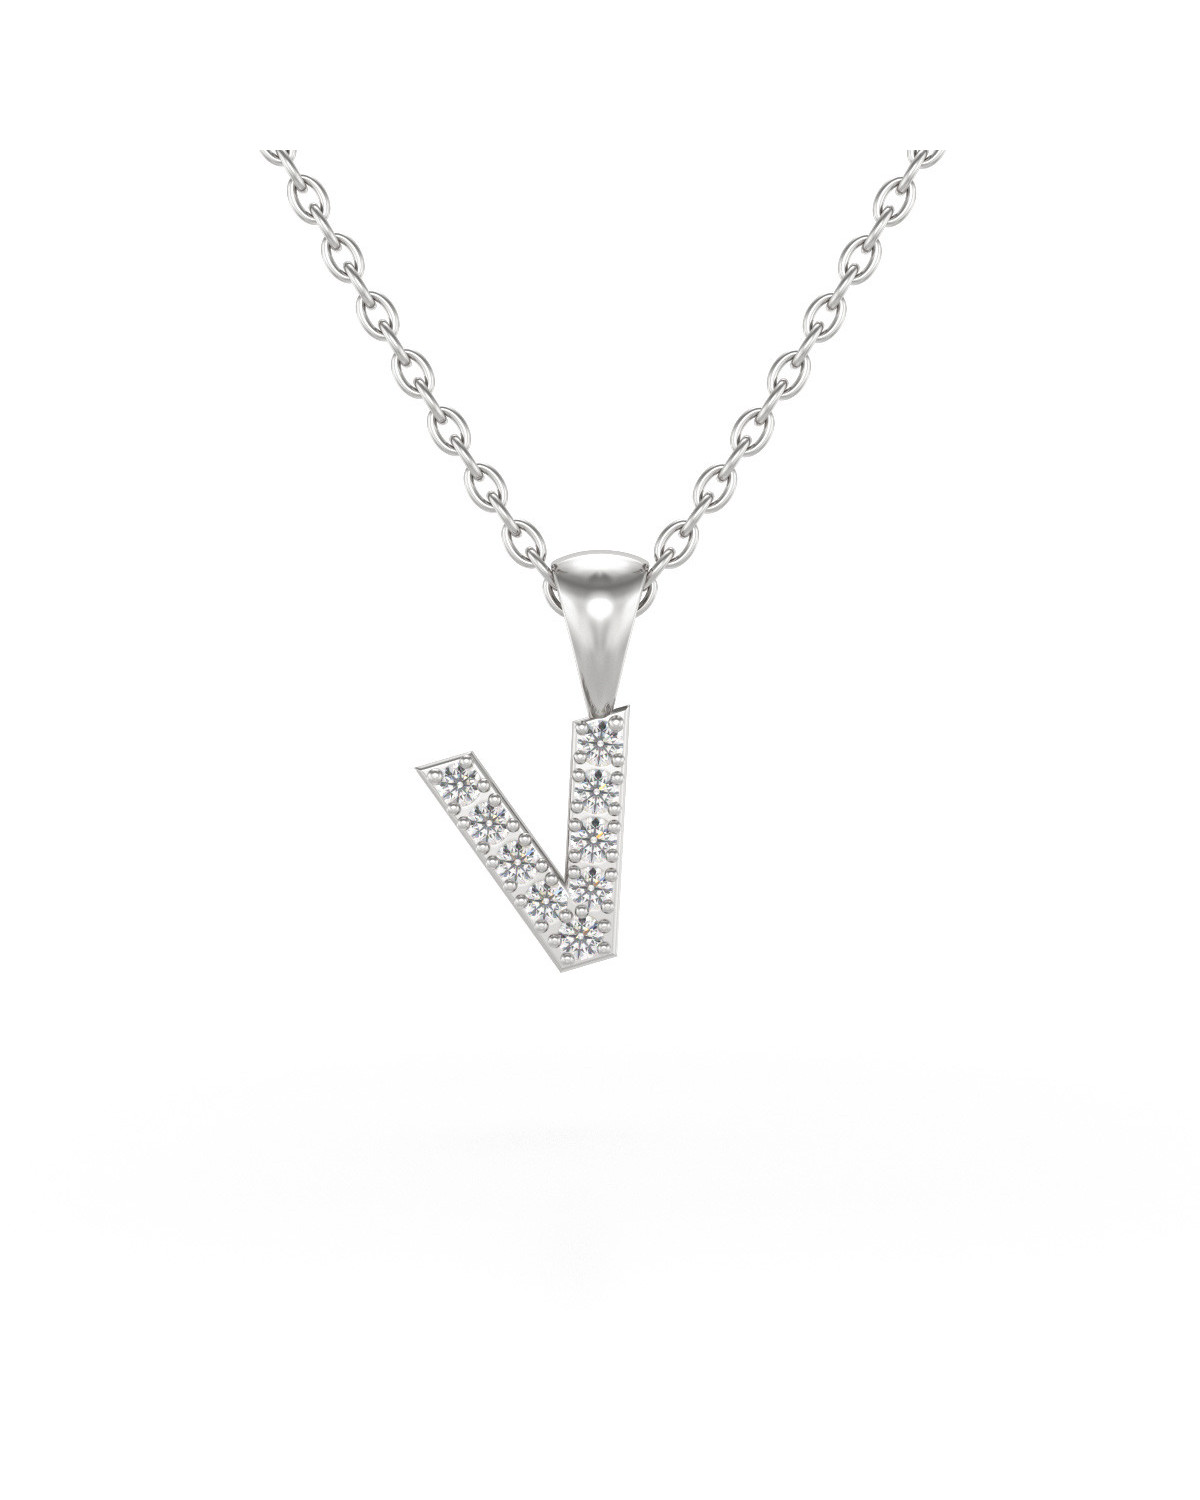 Collier Pendentif Lettre V Or Blanc Diamant Chaine Or incluse 0.72grs